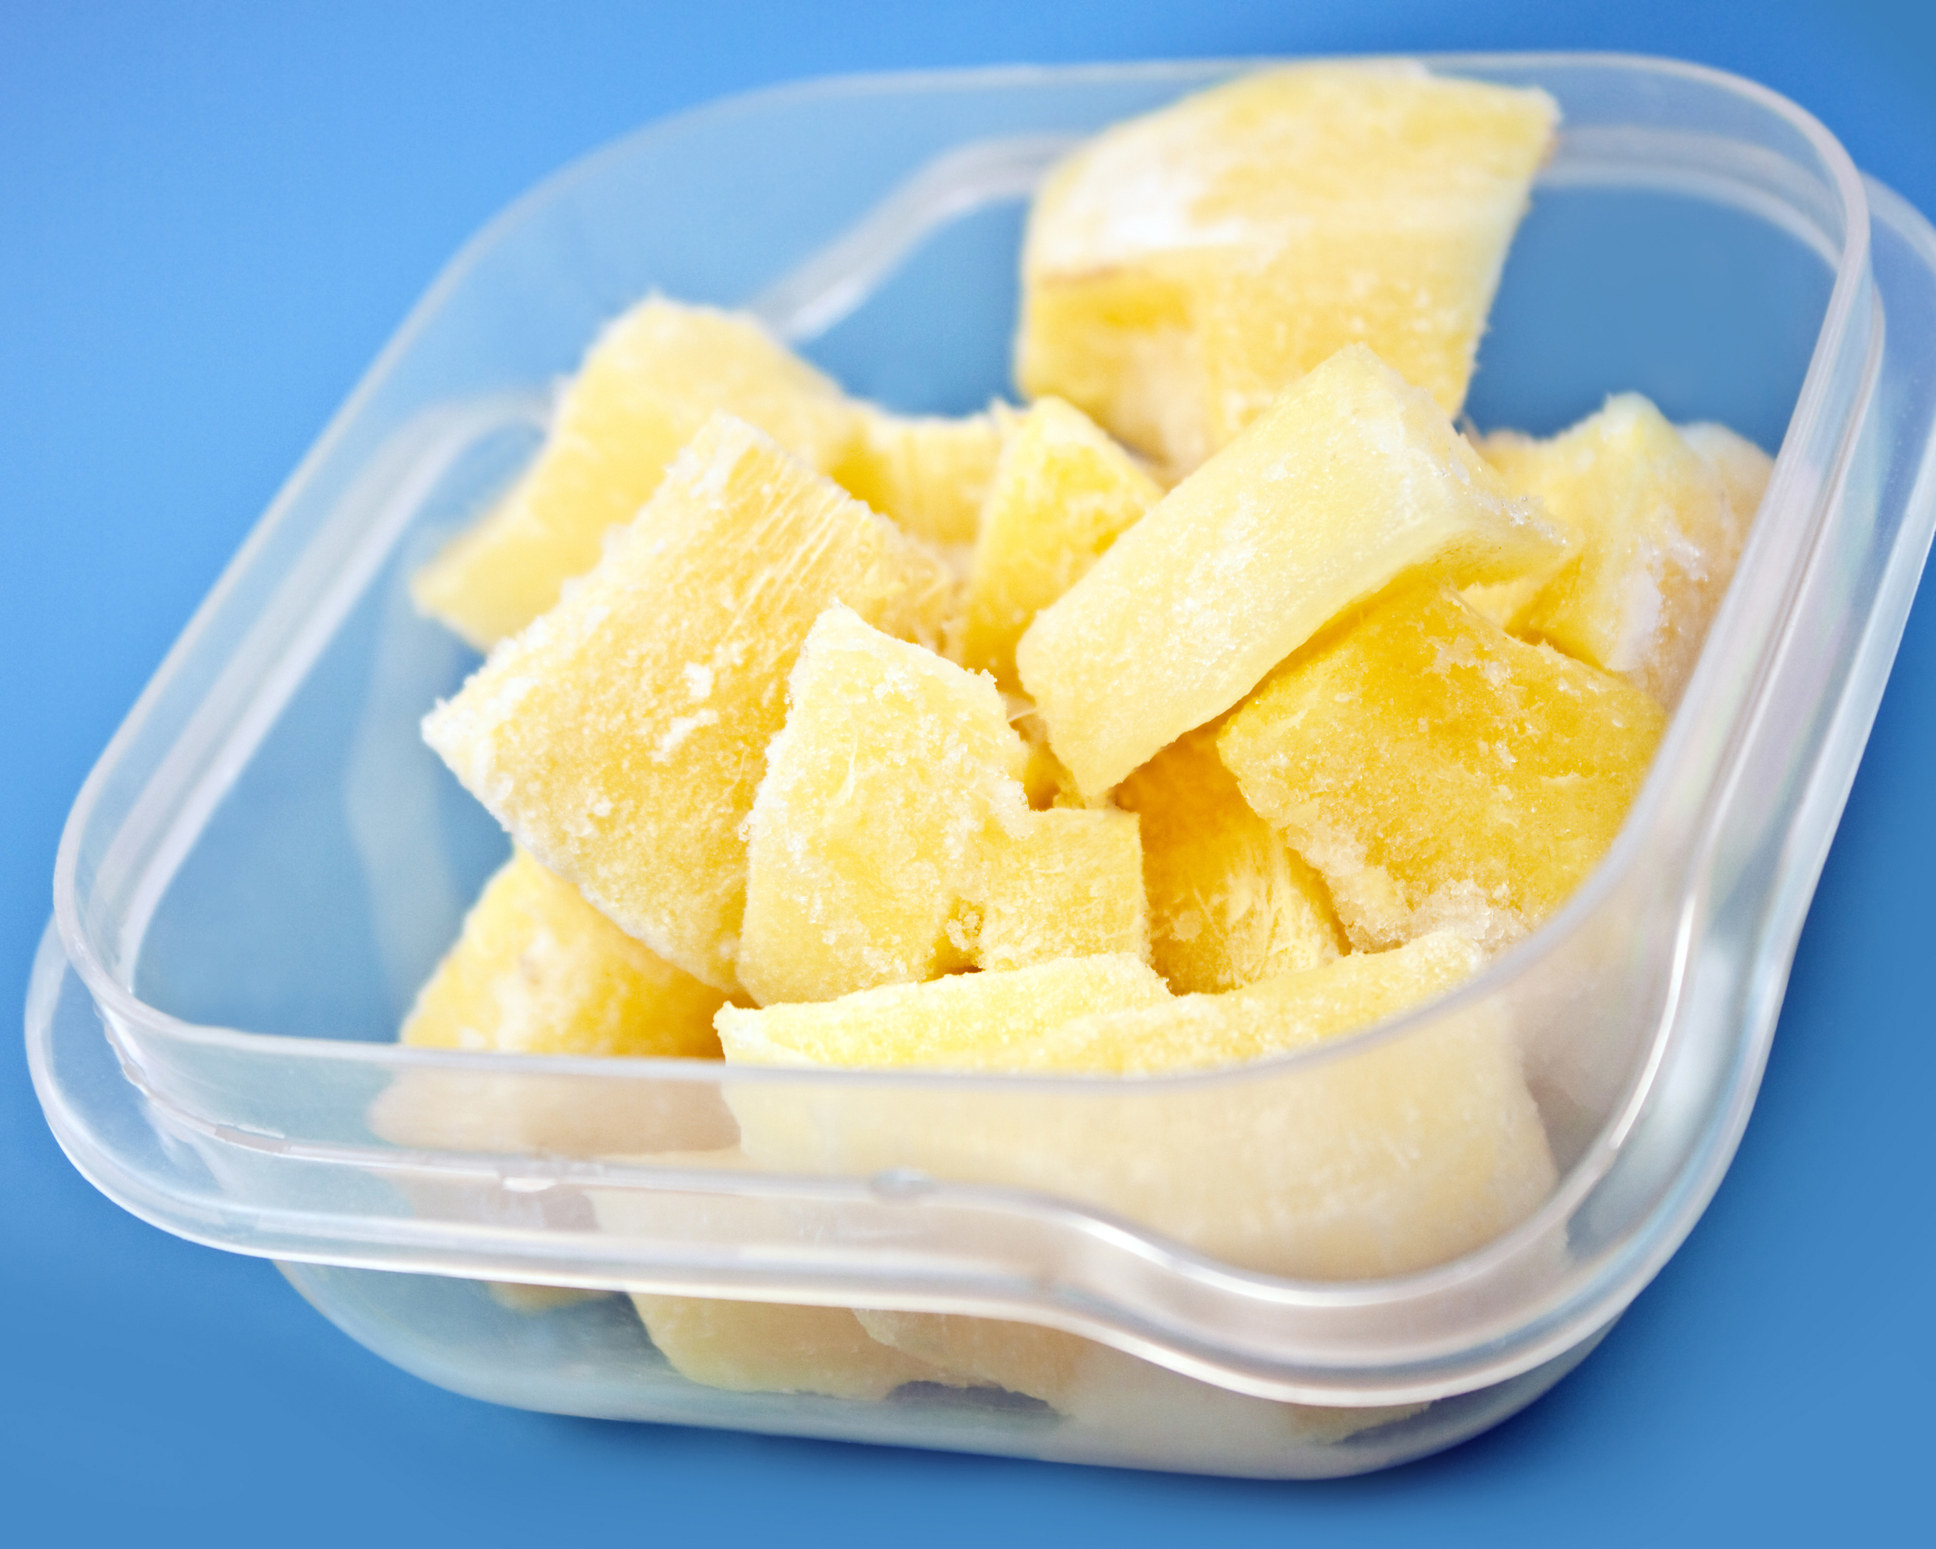 sliced ginger in a plastic container